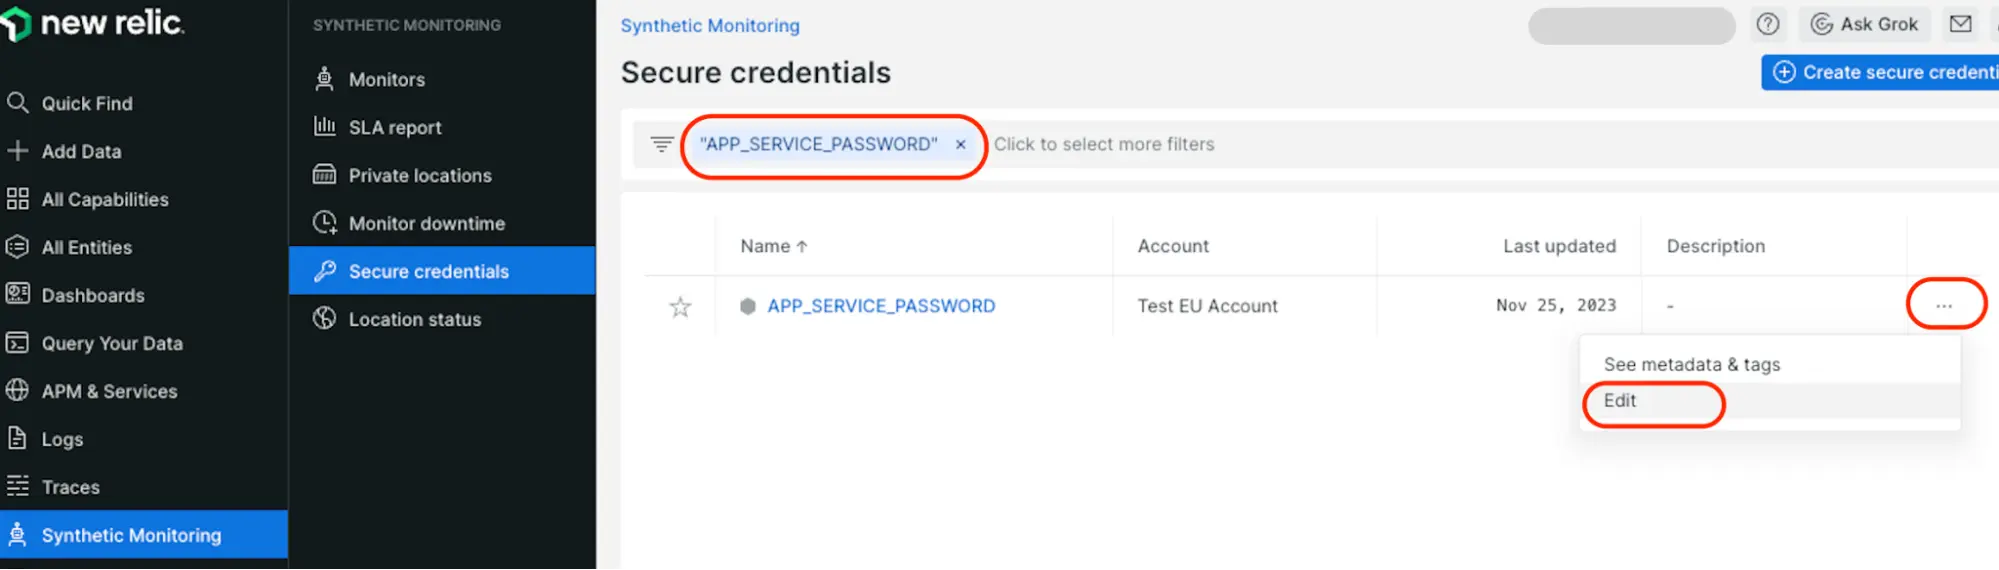 Screenshot showing how to use the filter bar to locate a specific secure credential